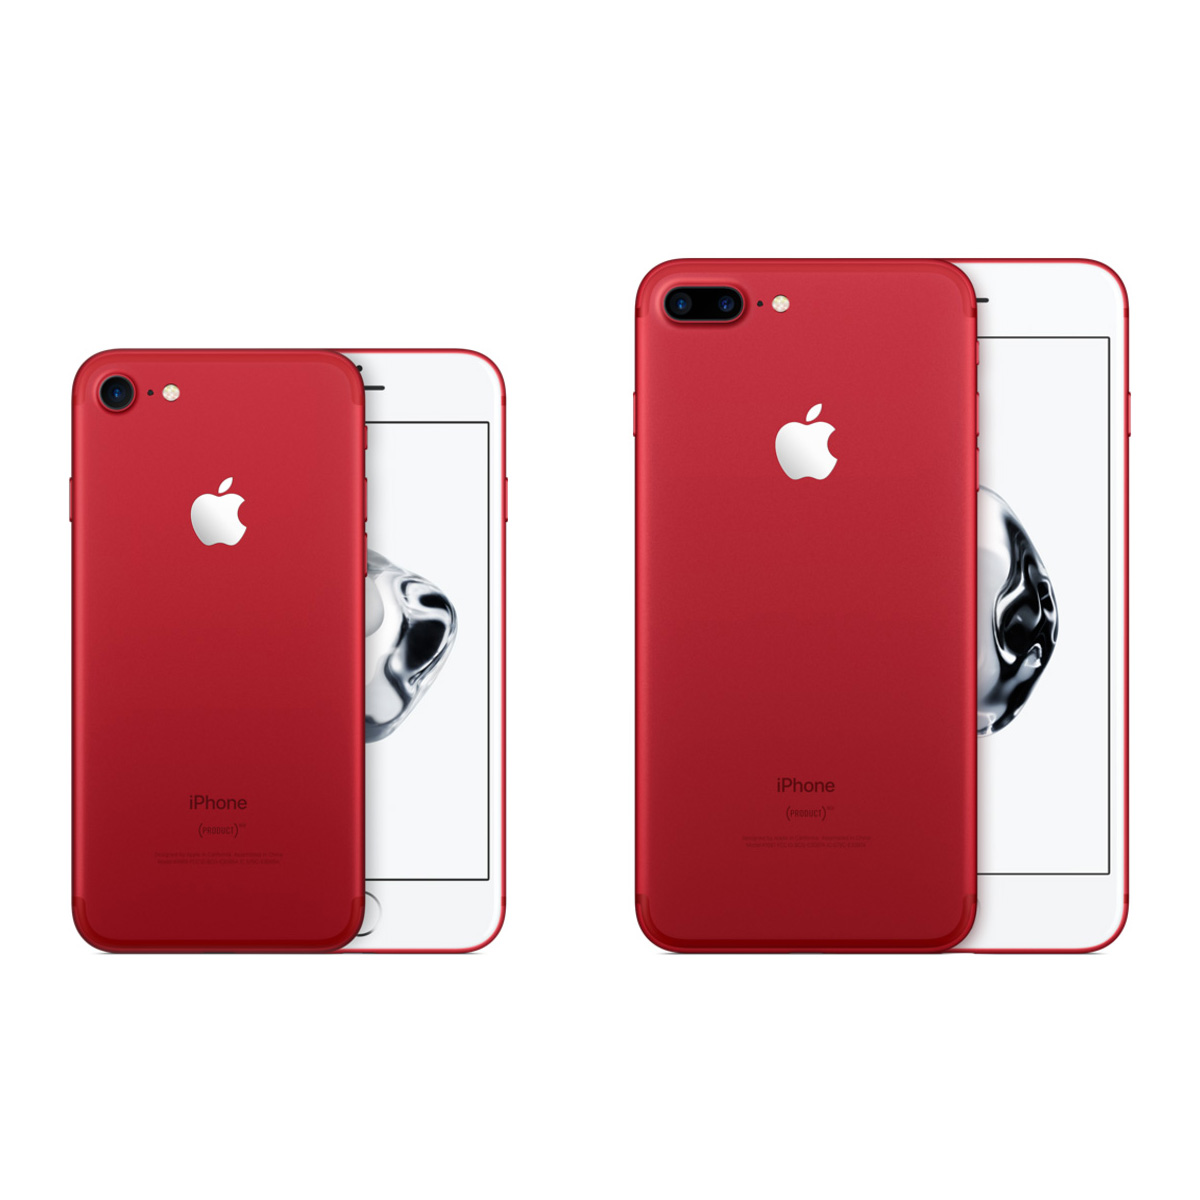 Apple iPhone 7/7 Plus (PRODUCT)RED Special Edition